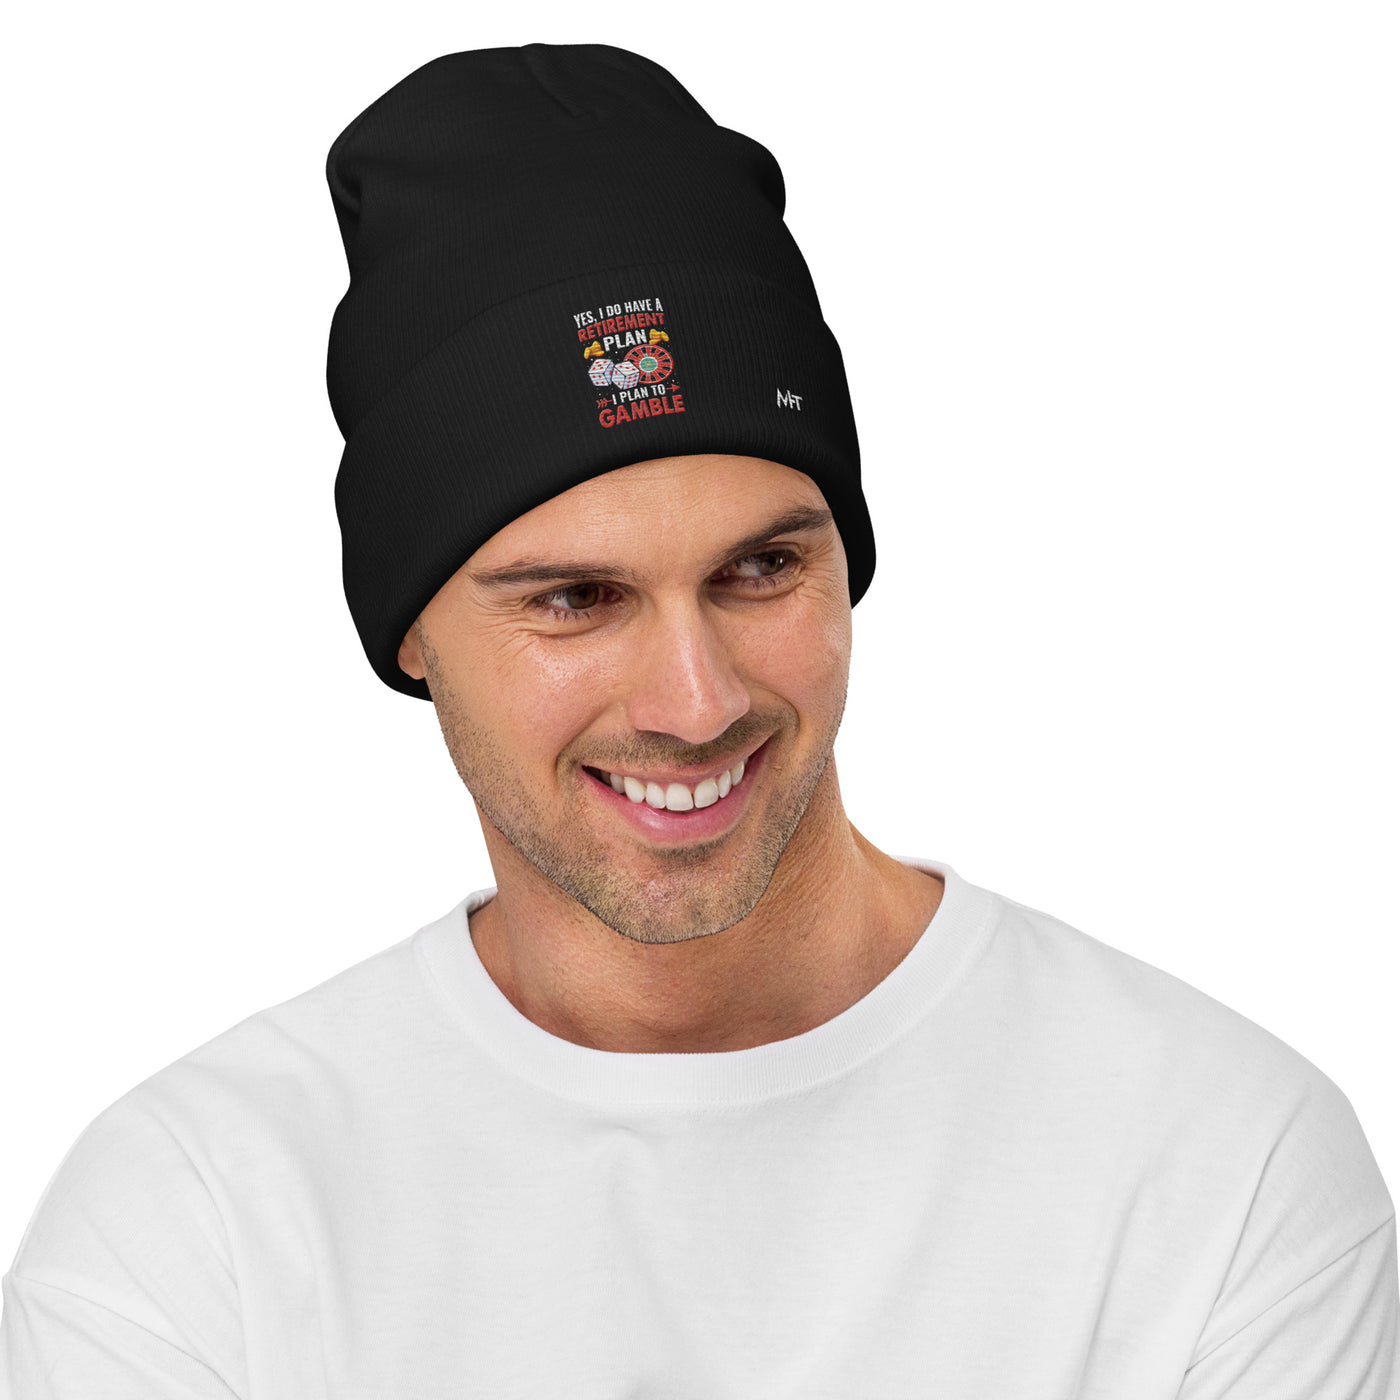 I Have a Retirement Plan; I Plan to Gamble - Embroidered Beanie